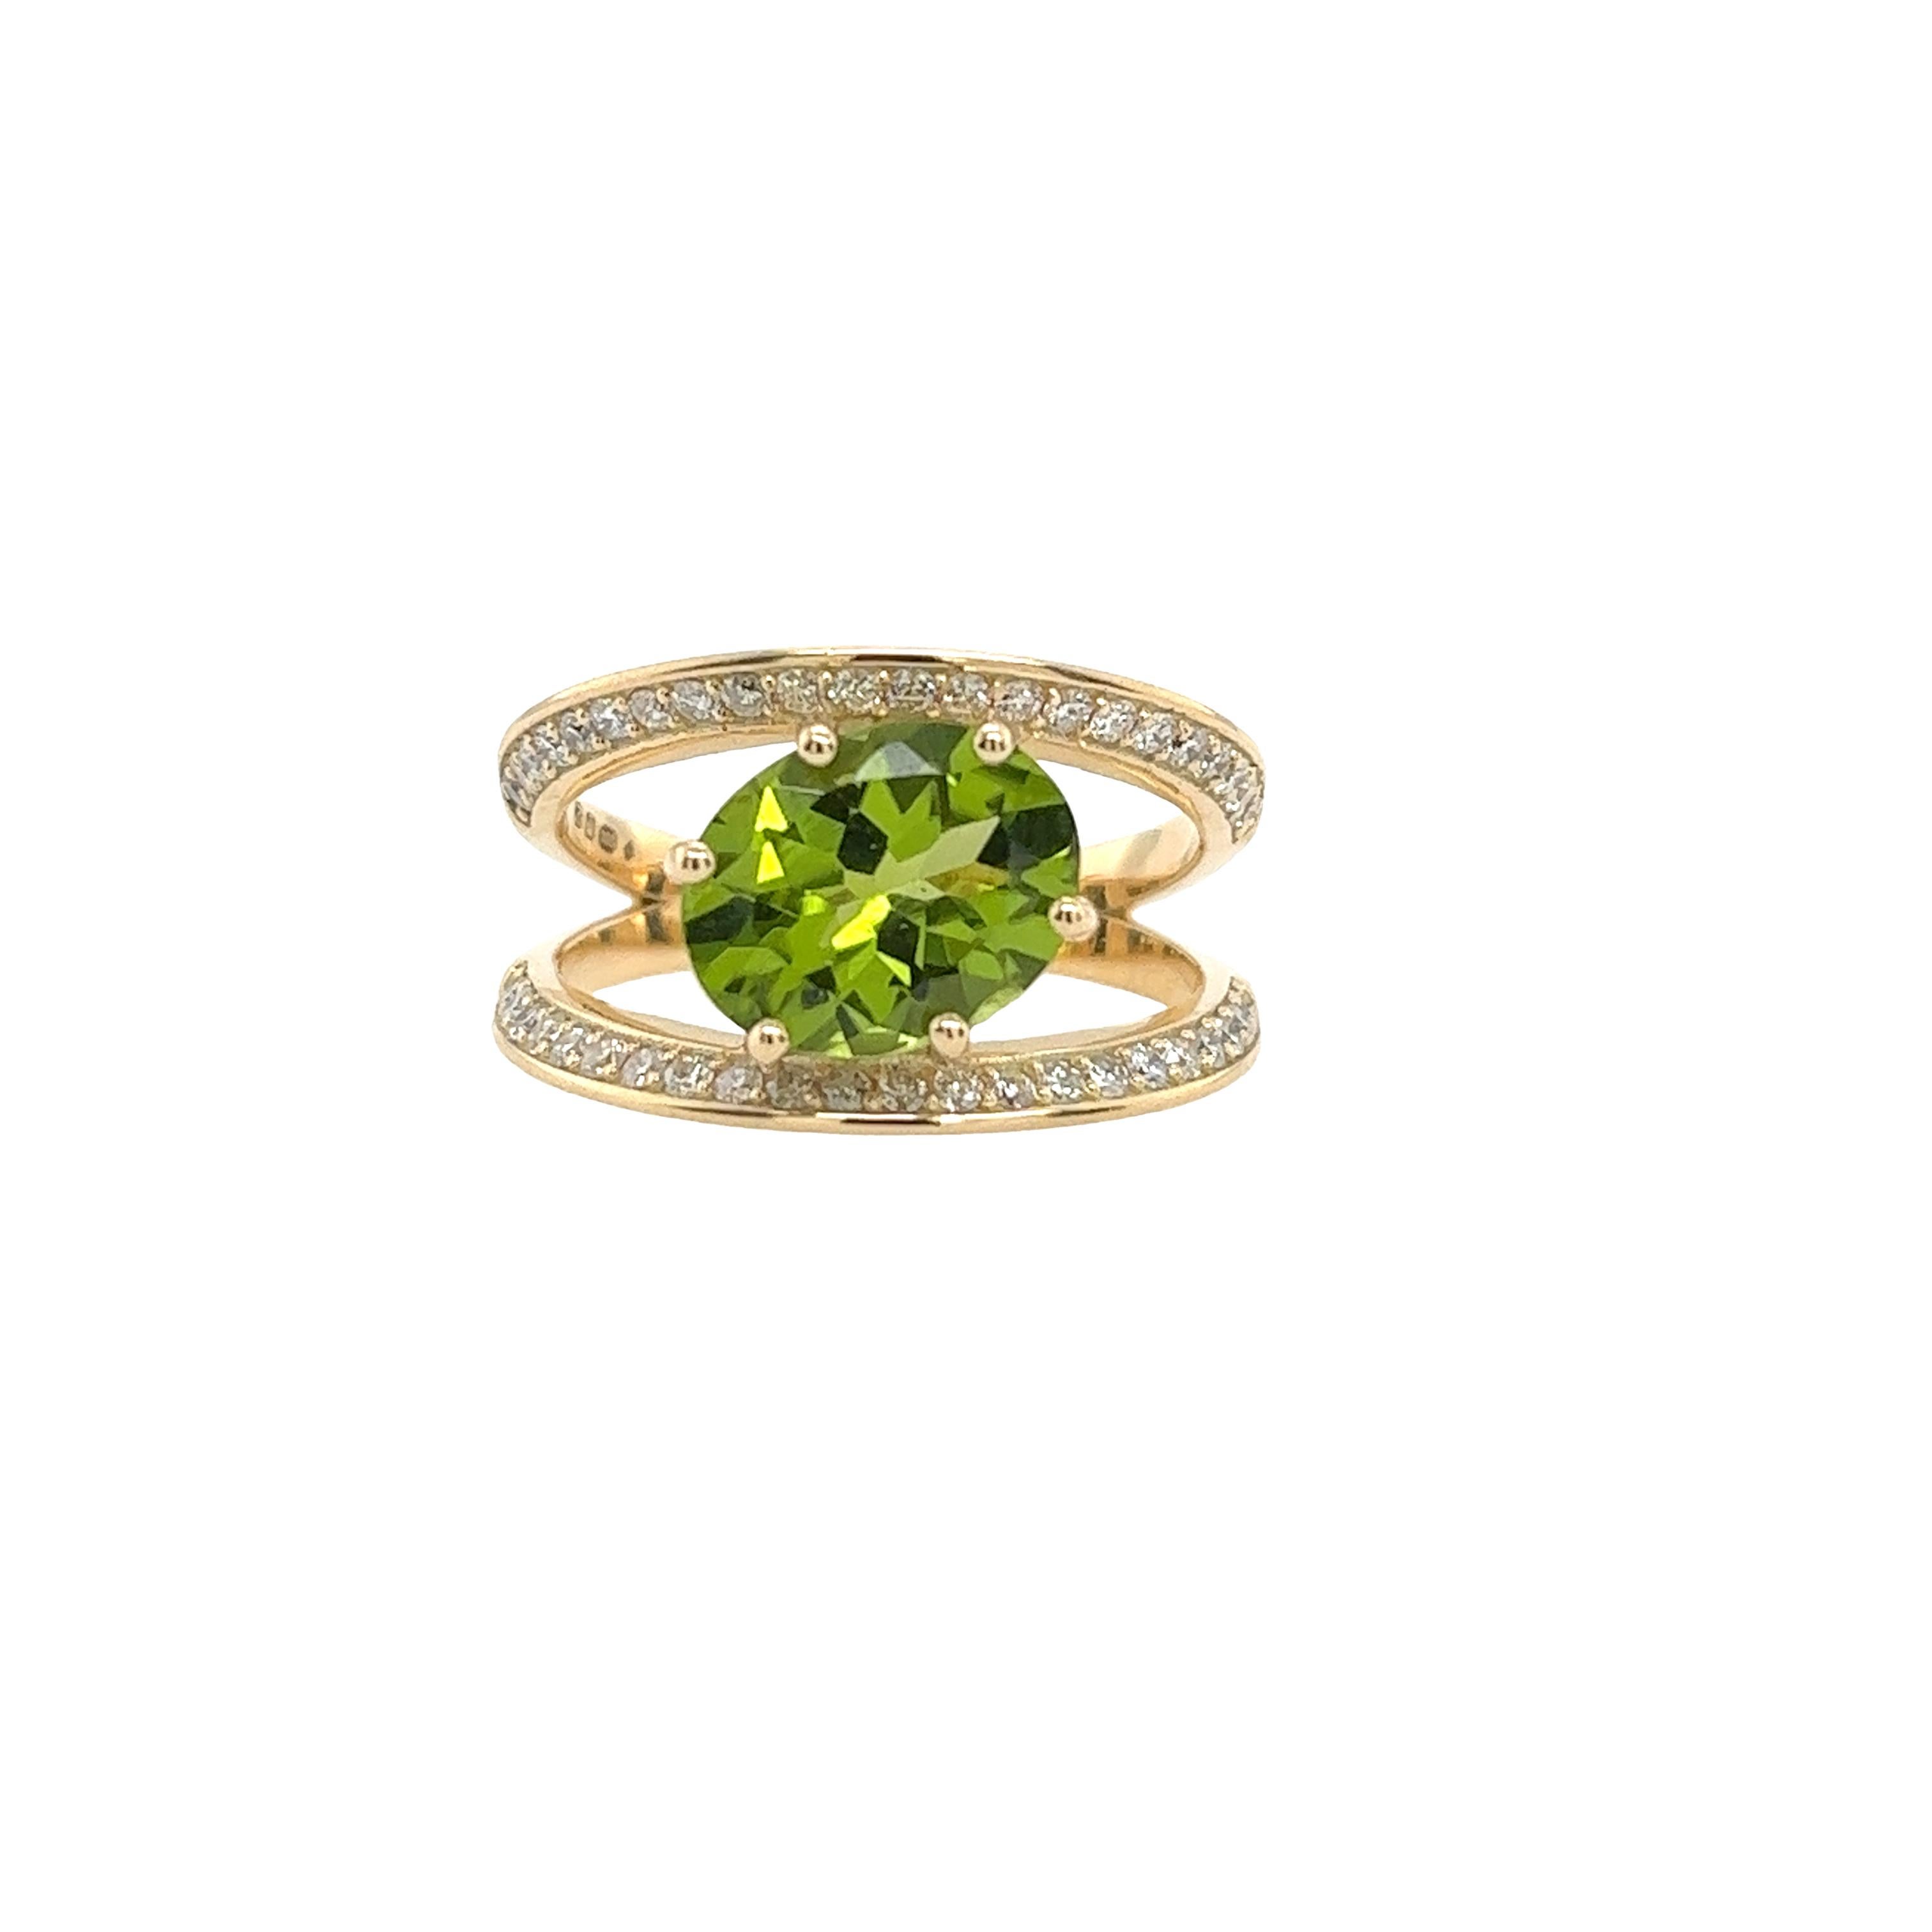 14ct Yellow Gold Diamond & Peridot Ring With 0.30ct small Diamonds Shoulders For Sale 1